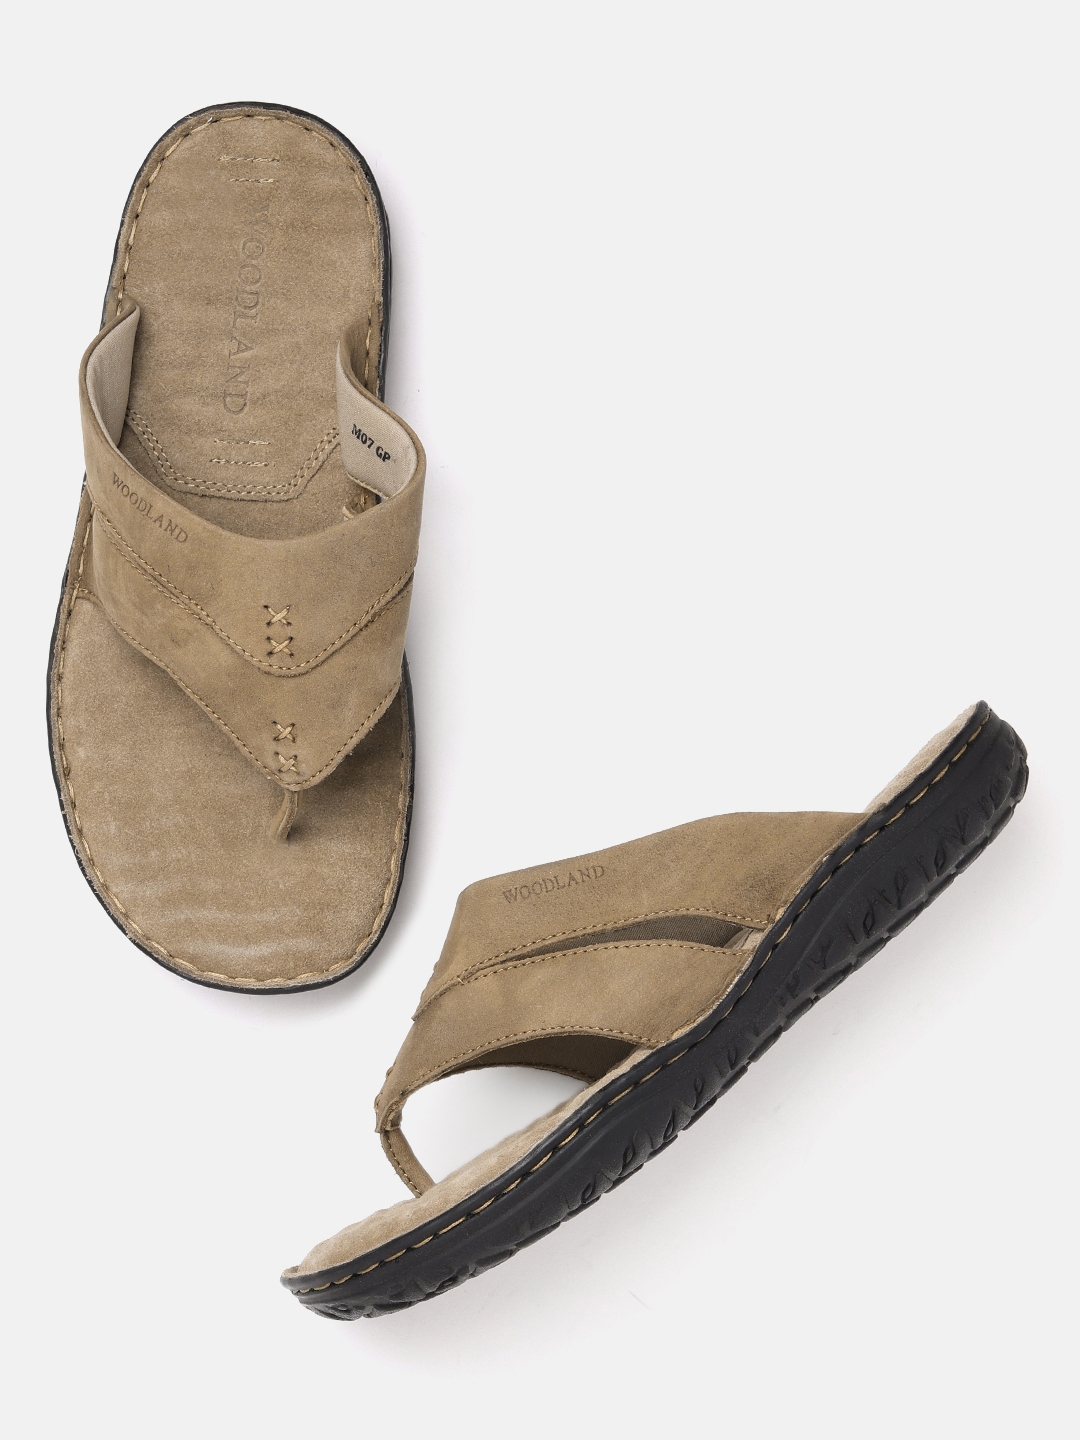 Woodland Sandals & Floaters - Upto 50% to 80% OFF on Woodland Sandals &  Floaters Online For Men at Best Prices in India | Flipkart.com